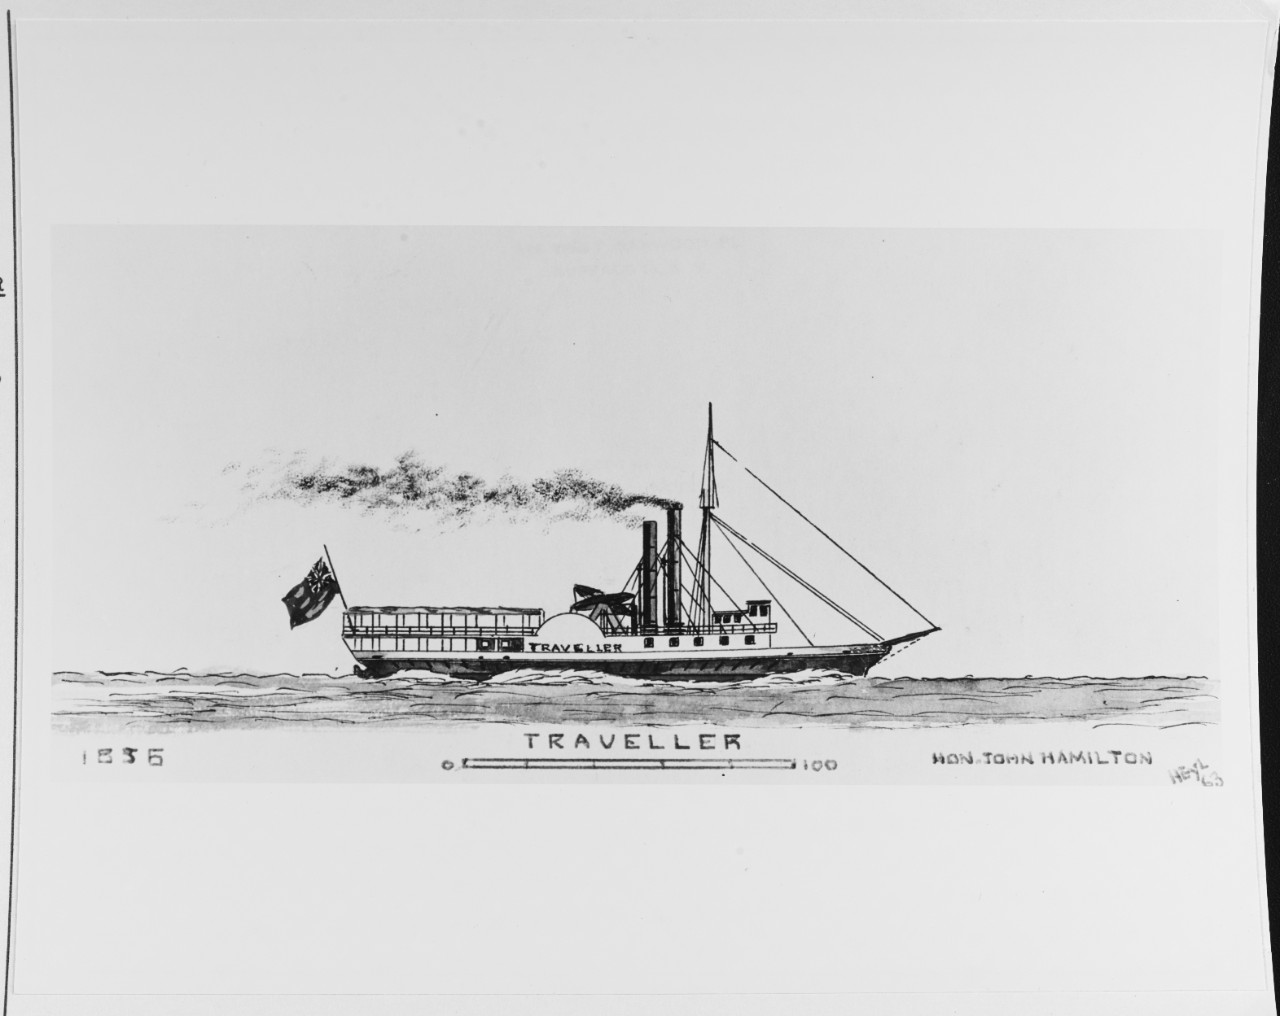 TRAVELLER (Canadian Merchant and Naval Steamer, 1835-1866)